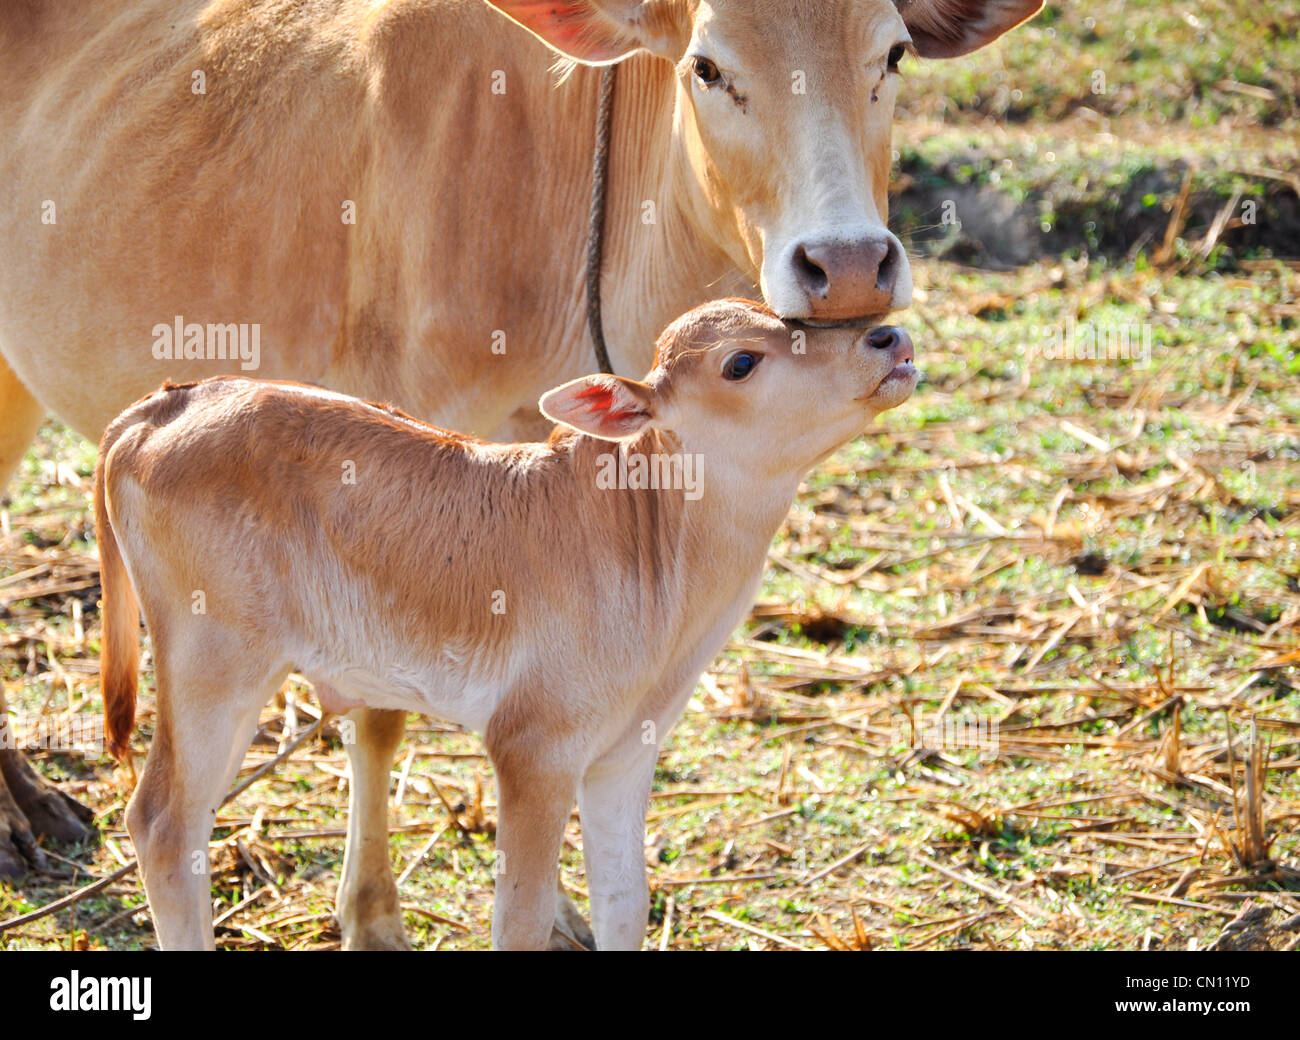 agriculture, animal, baby, bovine, brown, calf, cattle, Stock Photo